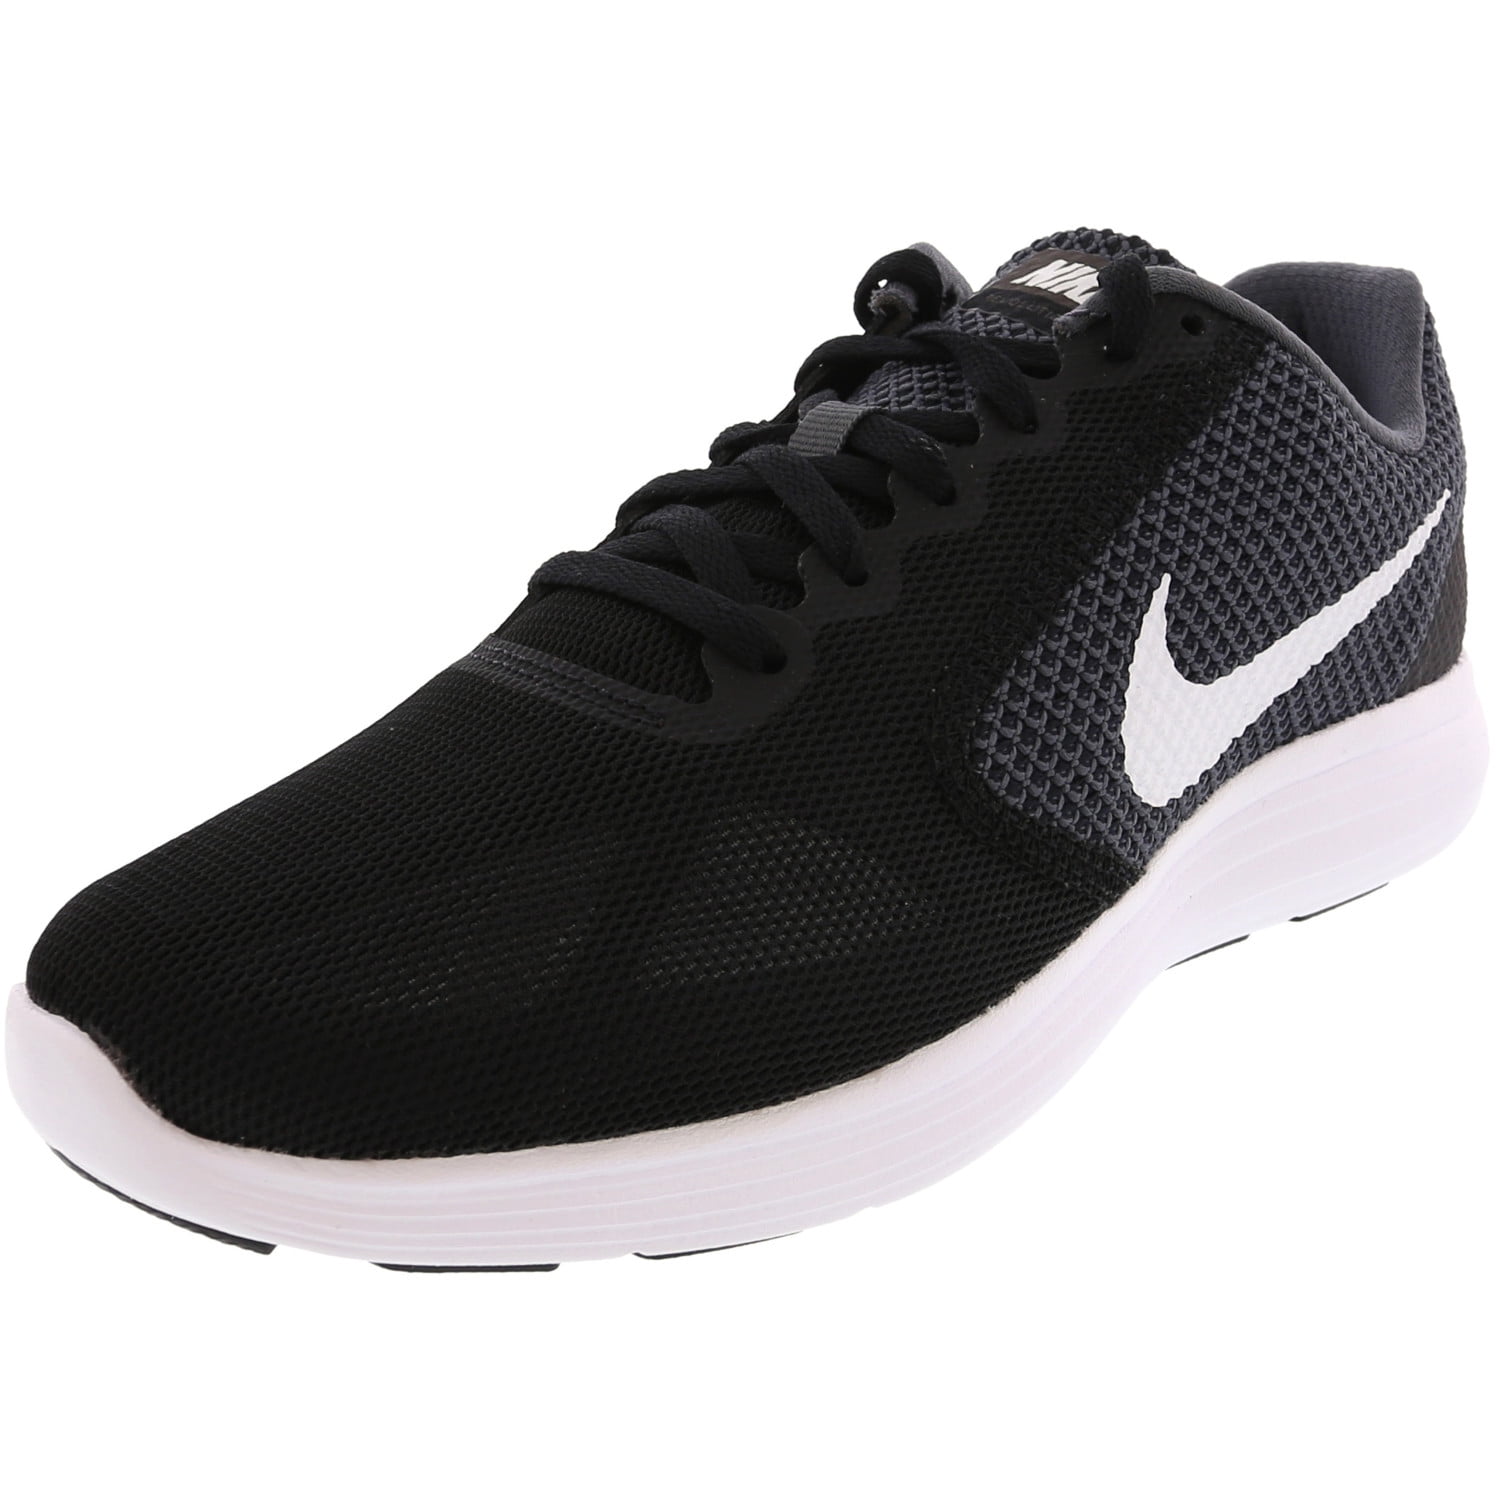 womens tennis shoes under $3